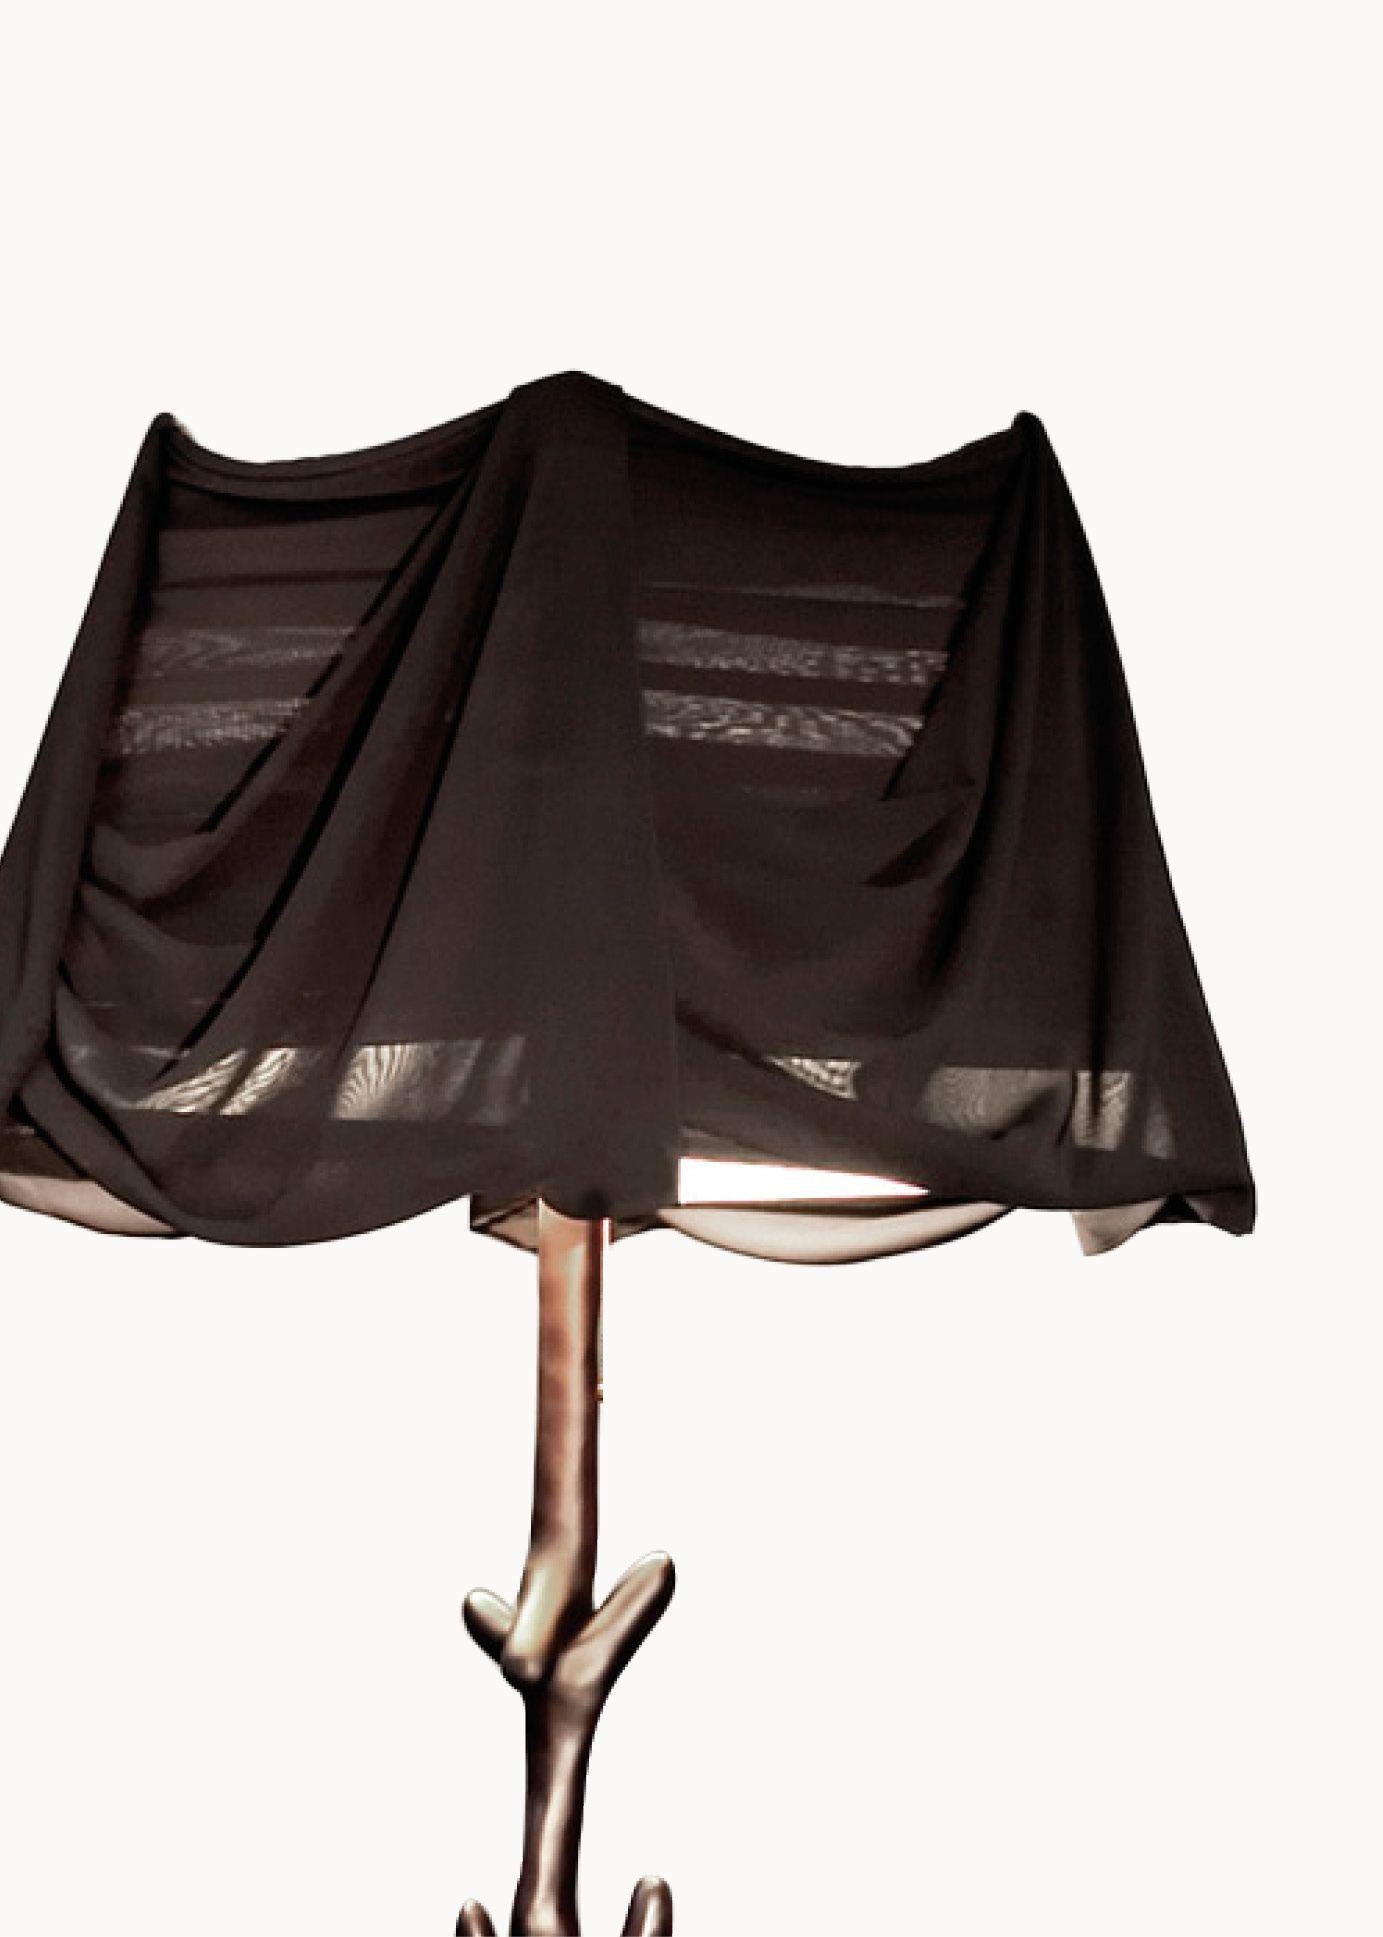 Muletas lamp designed by Salvador Dali manufactured by BD furniture in Barcelona.

Limited Edition
Dyed Lime Wood satin in black.
Lampshade in Transparent Black Chiffon.

Refined materials and handcrafted manufacturing to bring up to date a